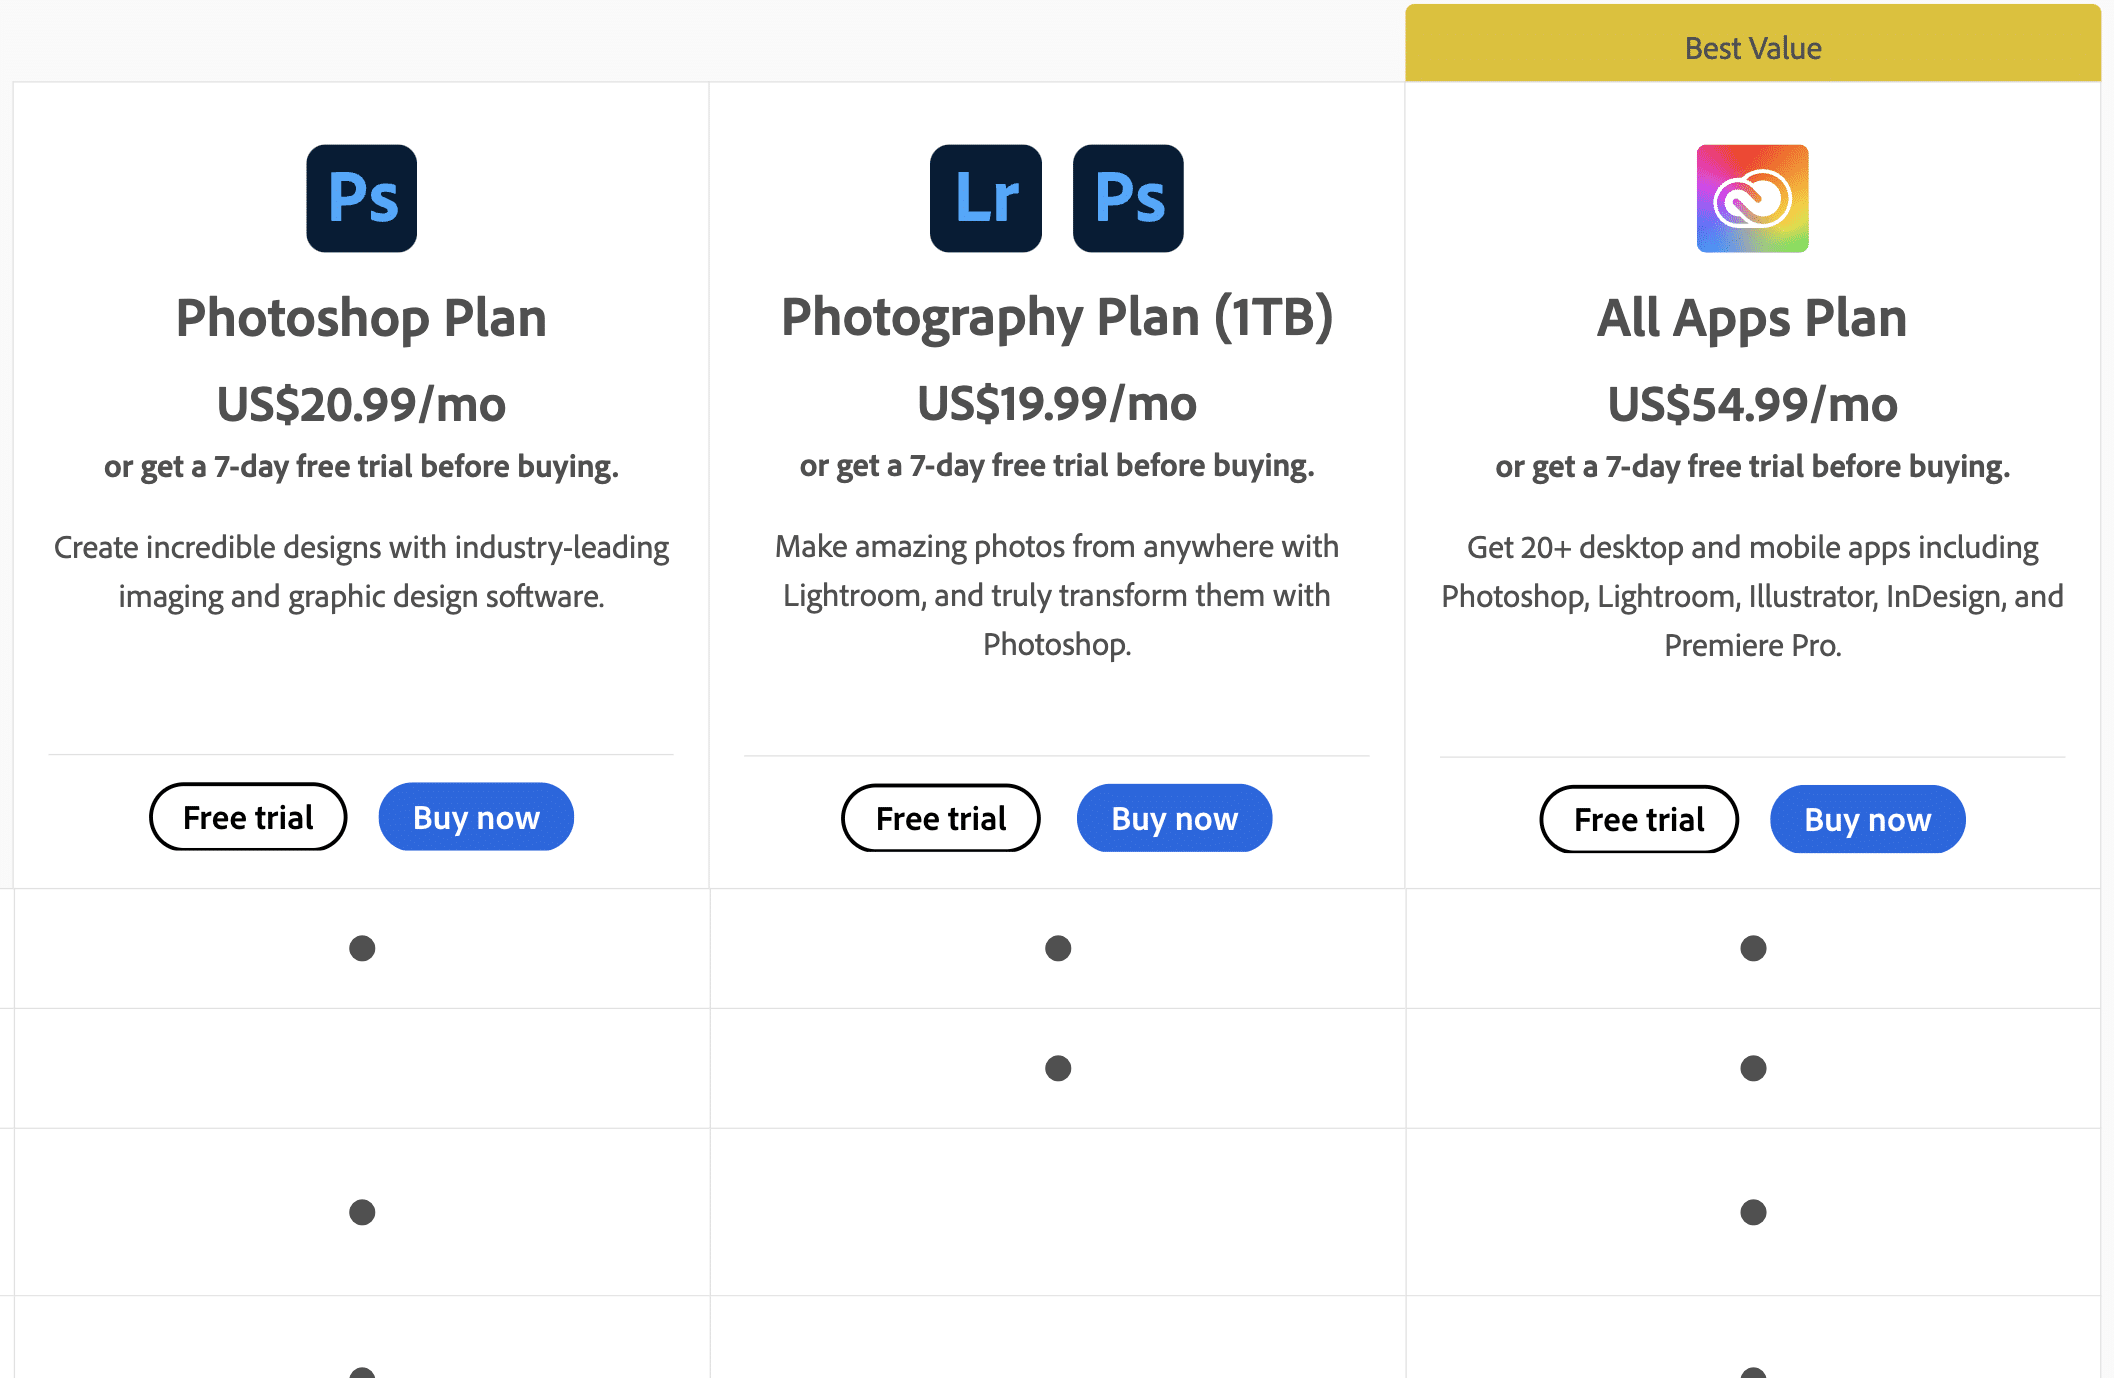 Pricing of Photoshop